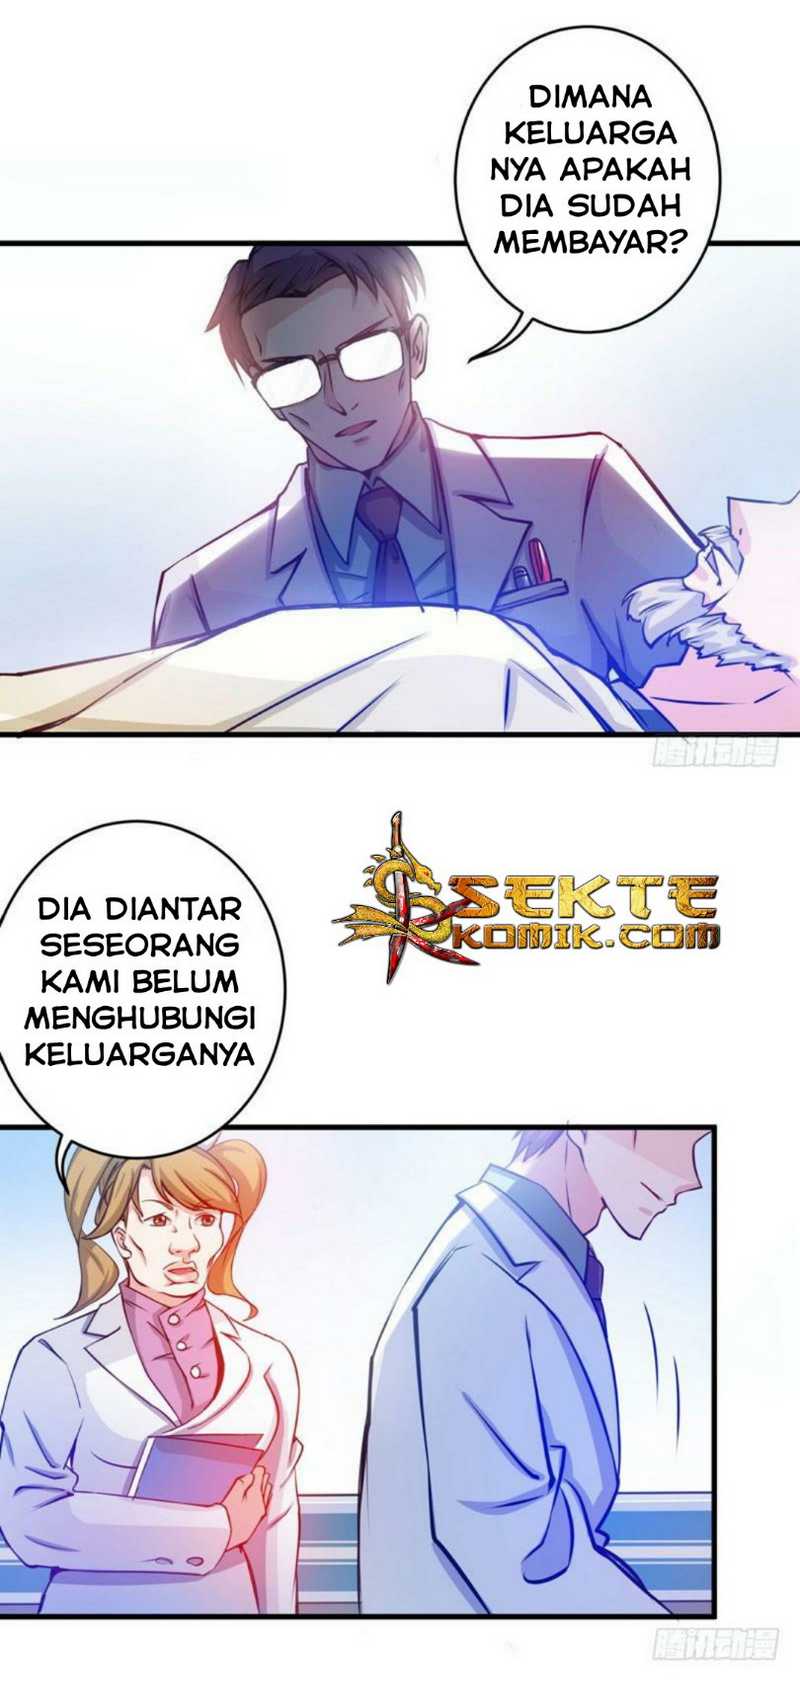 Strongest Divine Doctor Mixed City Chapter 8